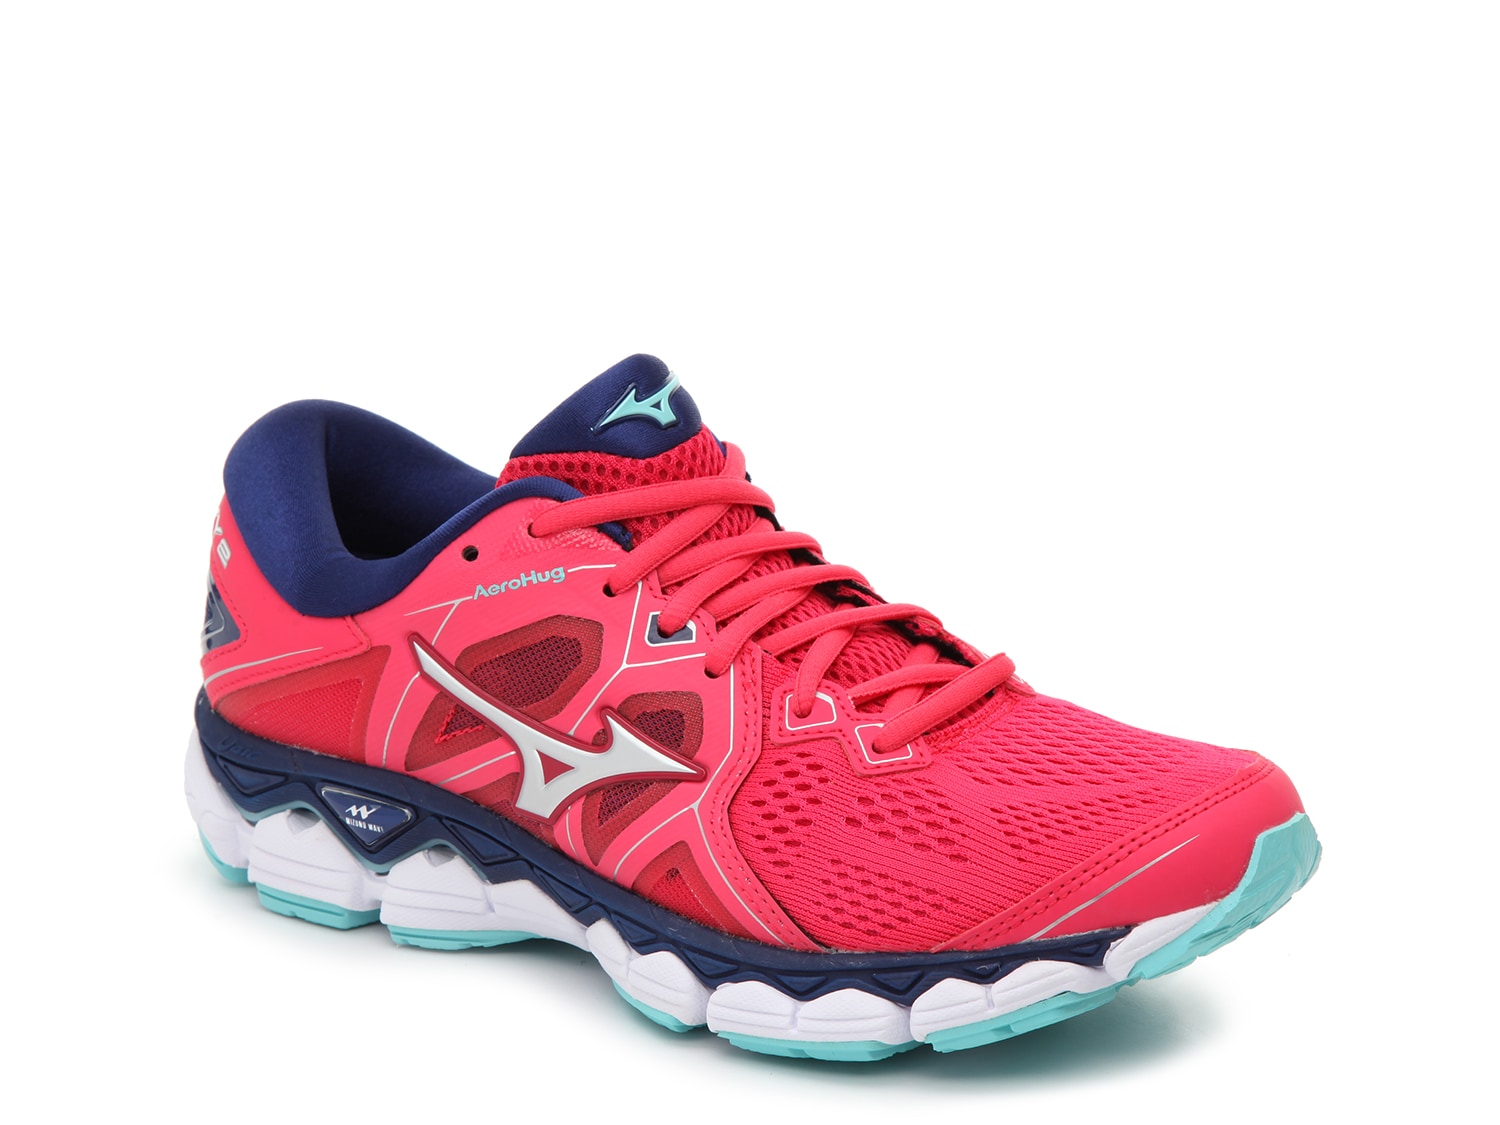 Details about   Mizuno Wave Sky 2 J1GD180204 Womens Gray Mesh Lace Up Athletic Running Shoes 